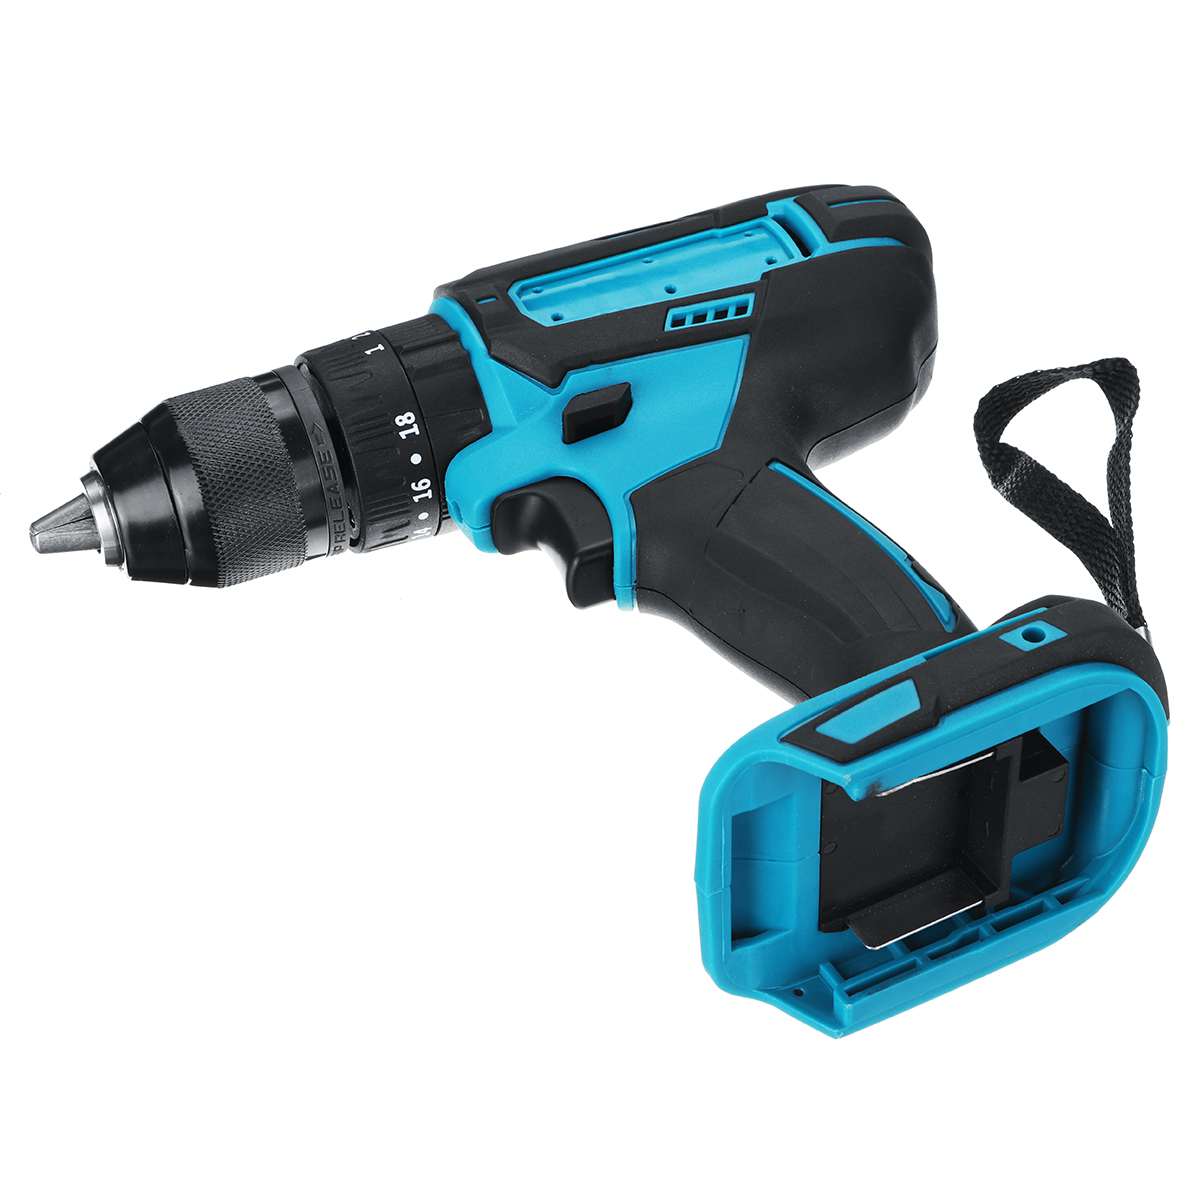 Drillpro-10mm-Chuck-Impact-Drill-350Nm-Cordless-Electric-Drill-For-Makita18V-Battery-4000RPM-LED-Lig-1642853-12